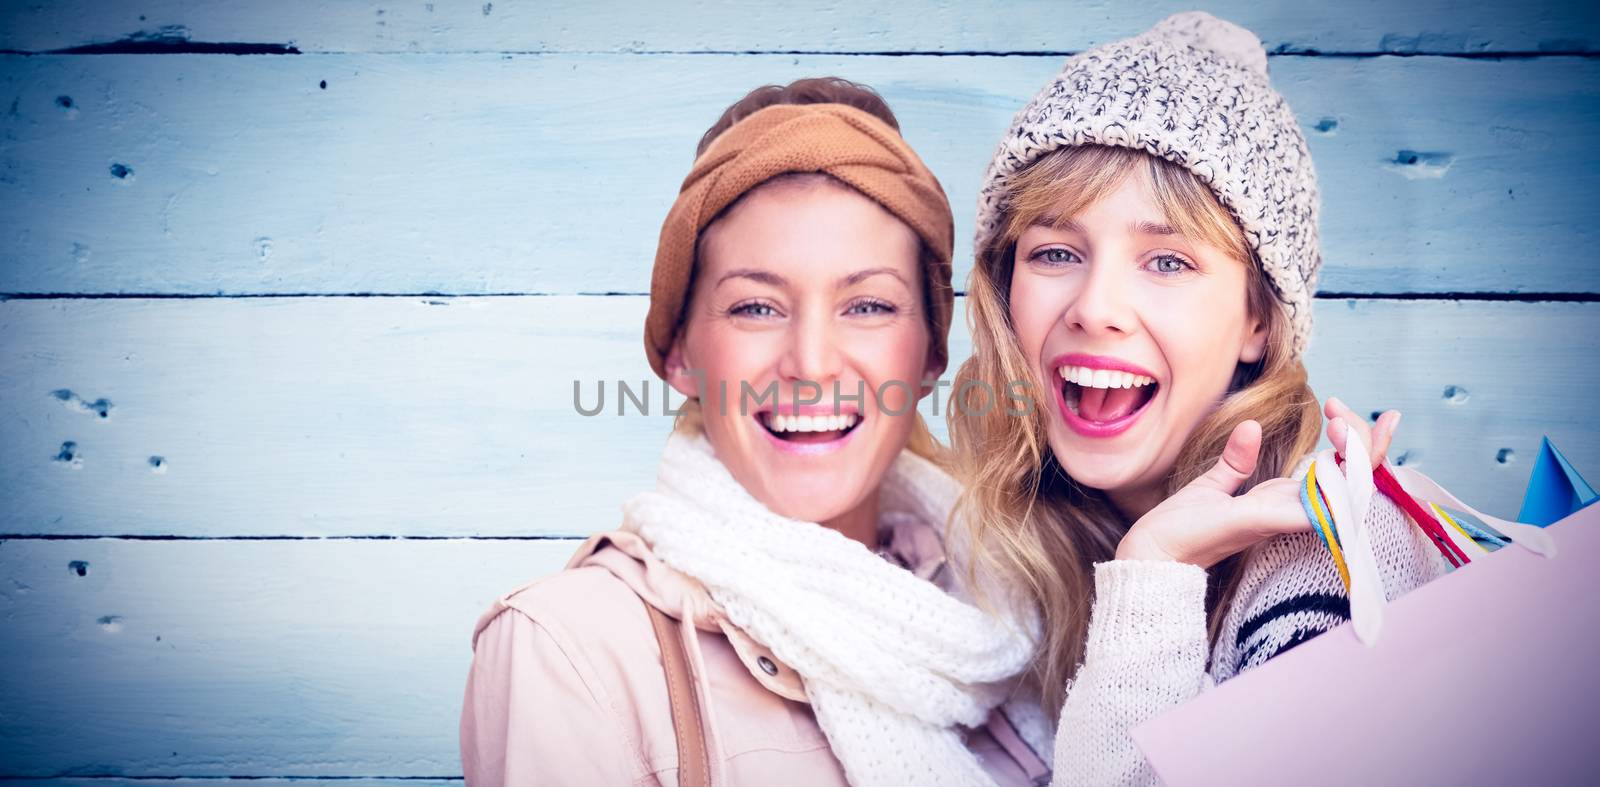 Smiling women looking at camera with shopping bags  against painted blue wooden planks